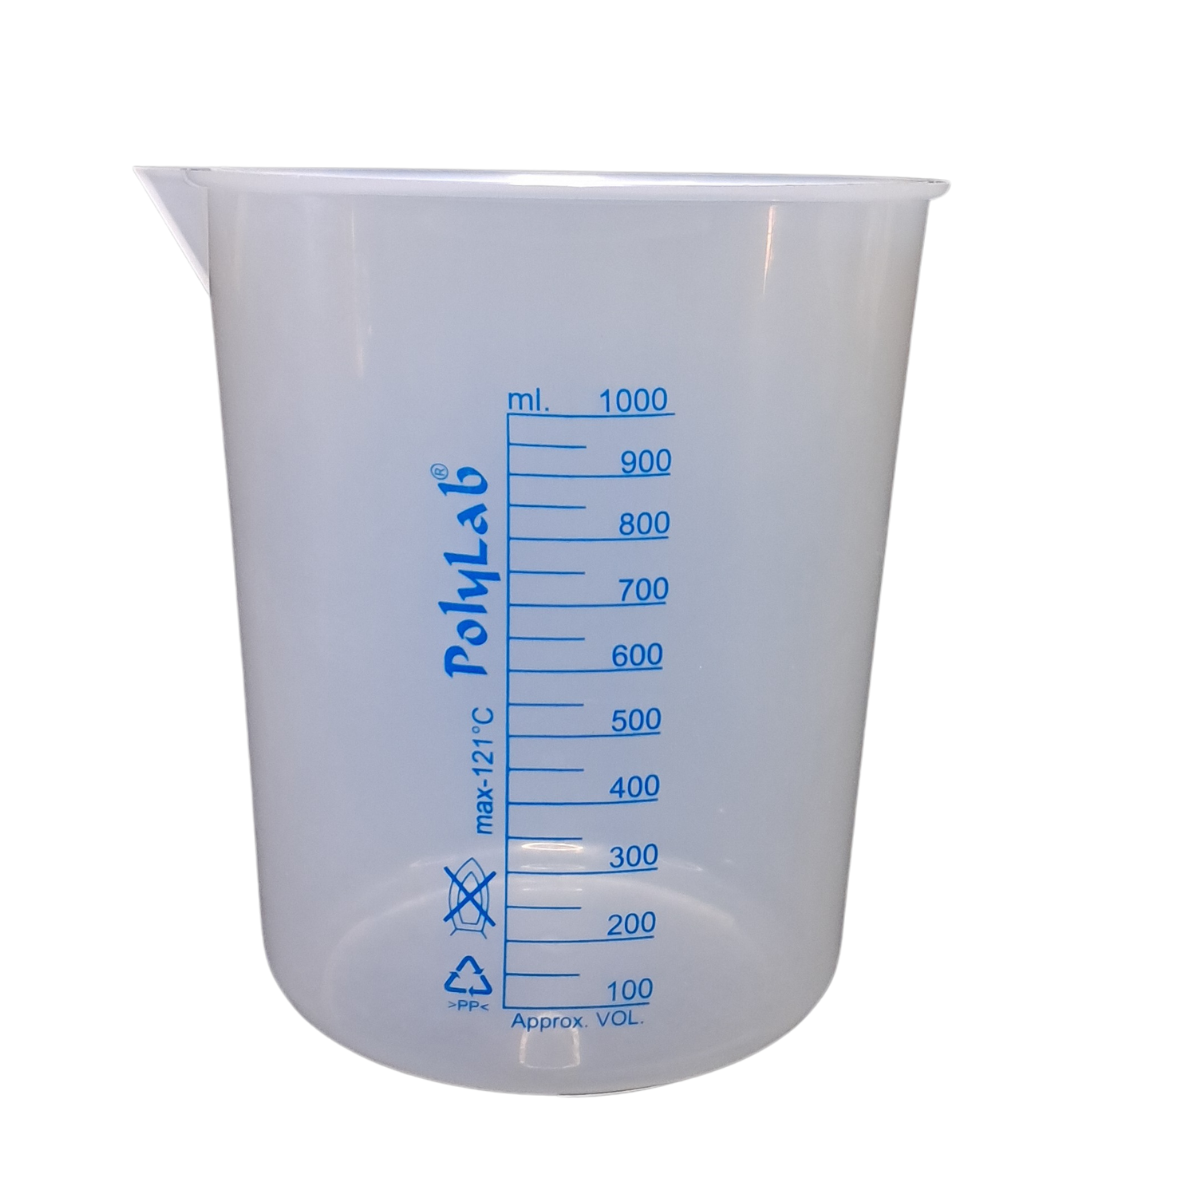 20ml / 30ml /50ml /300ml /500ml/1000ml Clear Plastic Graduated Measuring Cup  For Baking Beaker Liquid Measure JugCup Container From Goodcomfortable,  $0.14